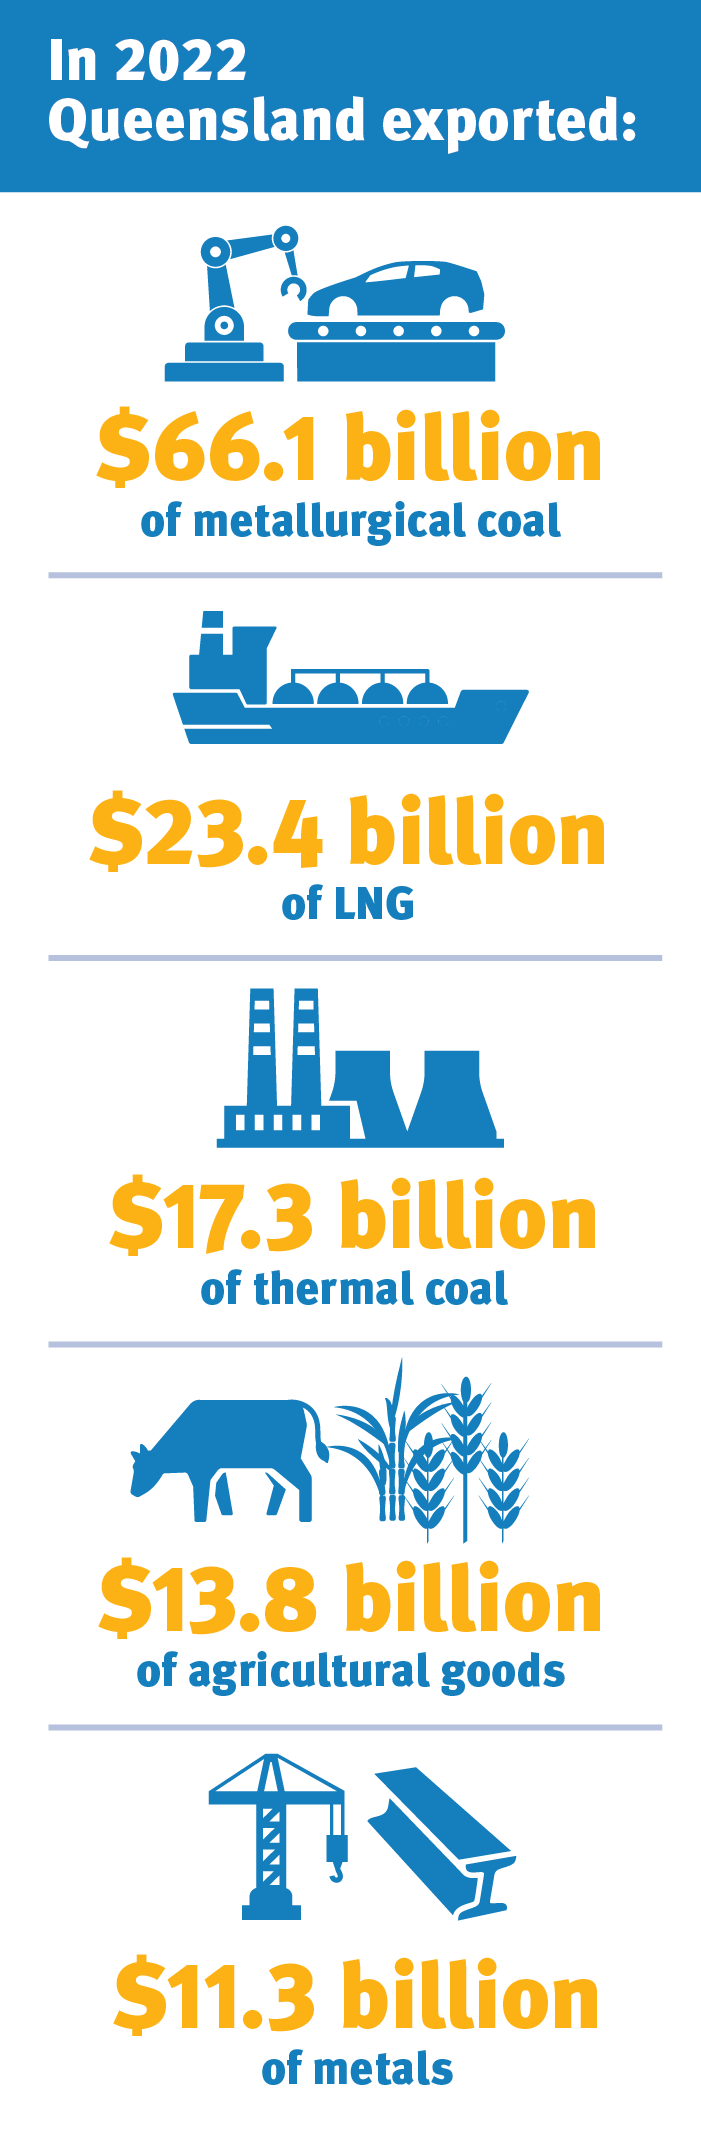 In 2022 Queensland exported $66.1b of metallurgical coal, $23.4b of LNG, $17.3b of thermal coal, $13.8b of agricultural goods and $11.3b of metals.